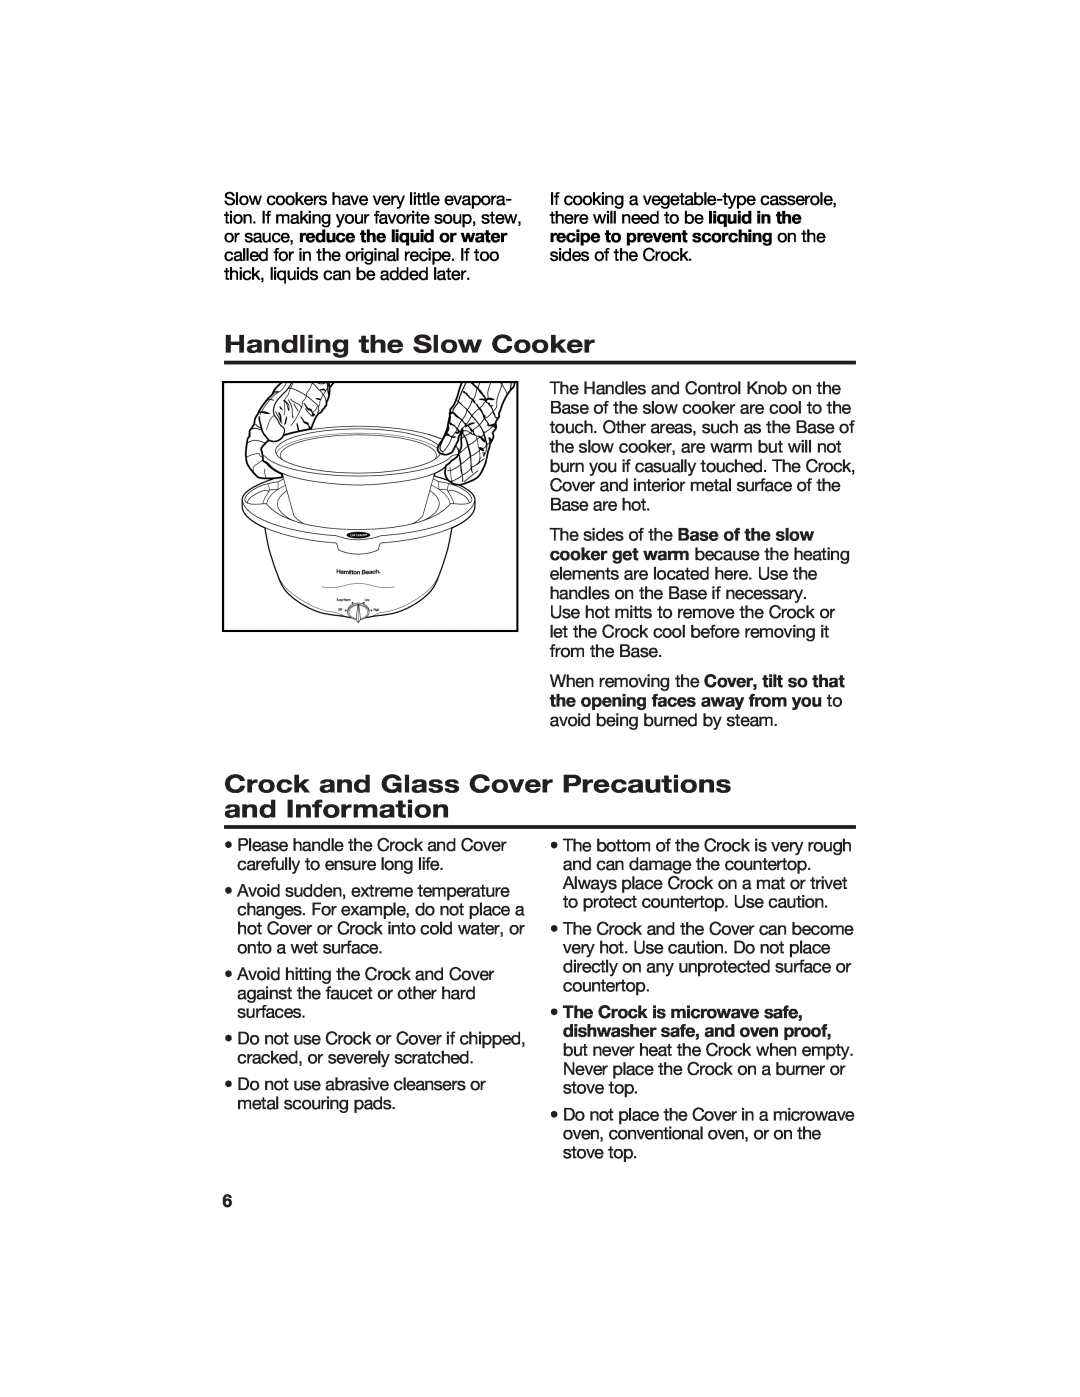 Hamilton Beach 840071200 manual Handling the Slow Cooker, Crock and Glass Cover Precautions and Information 